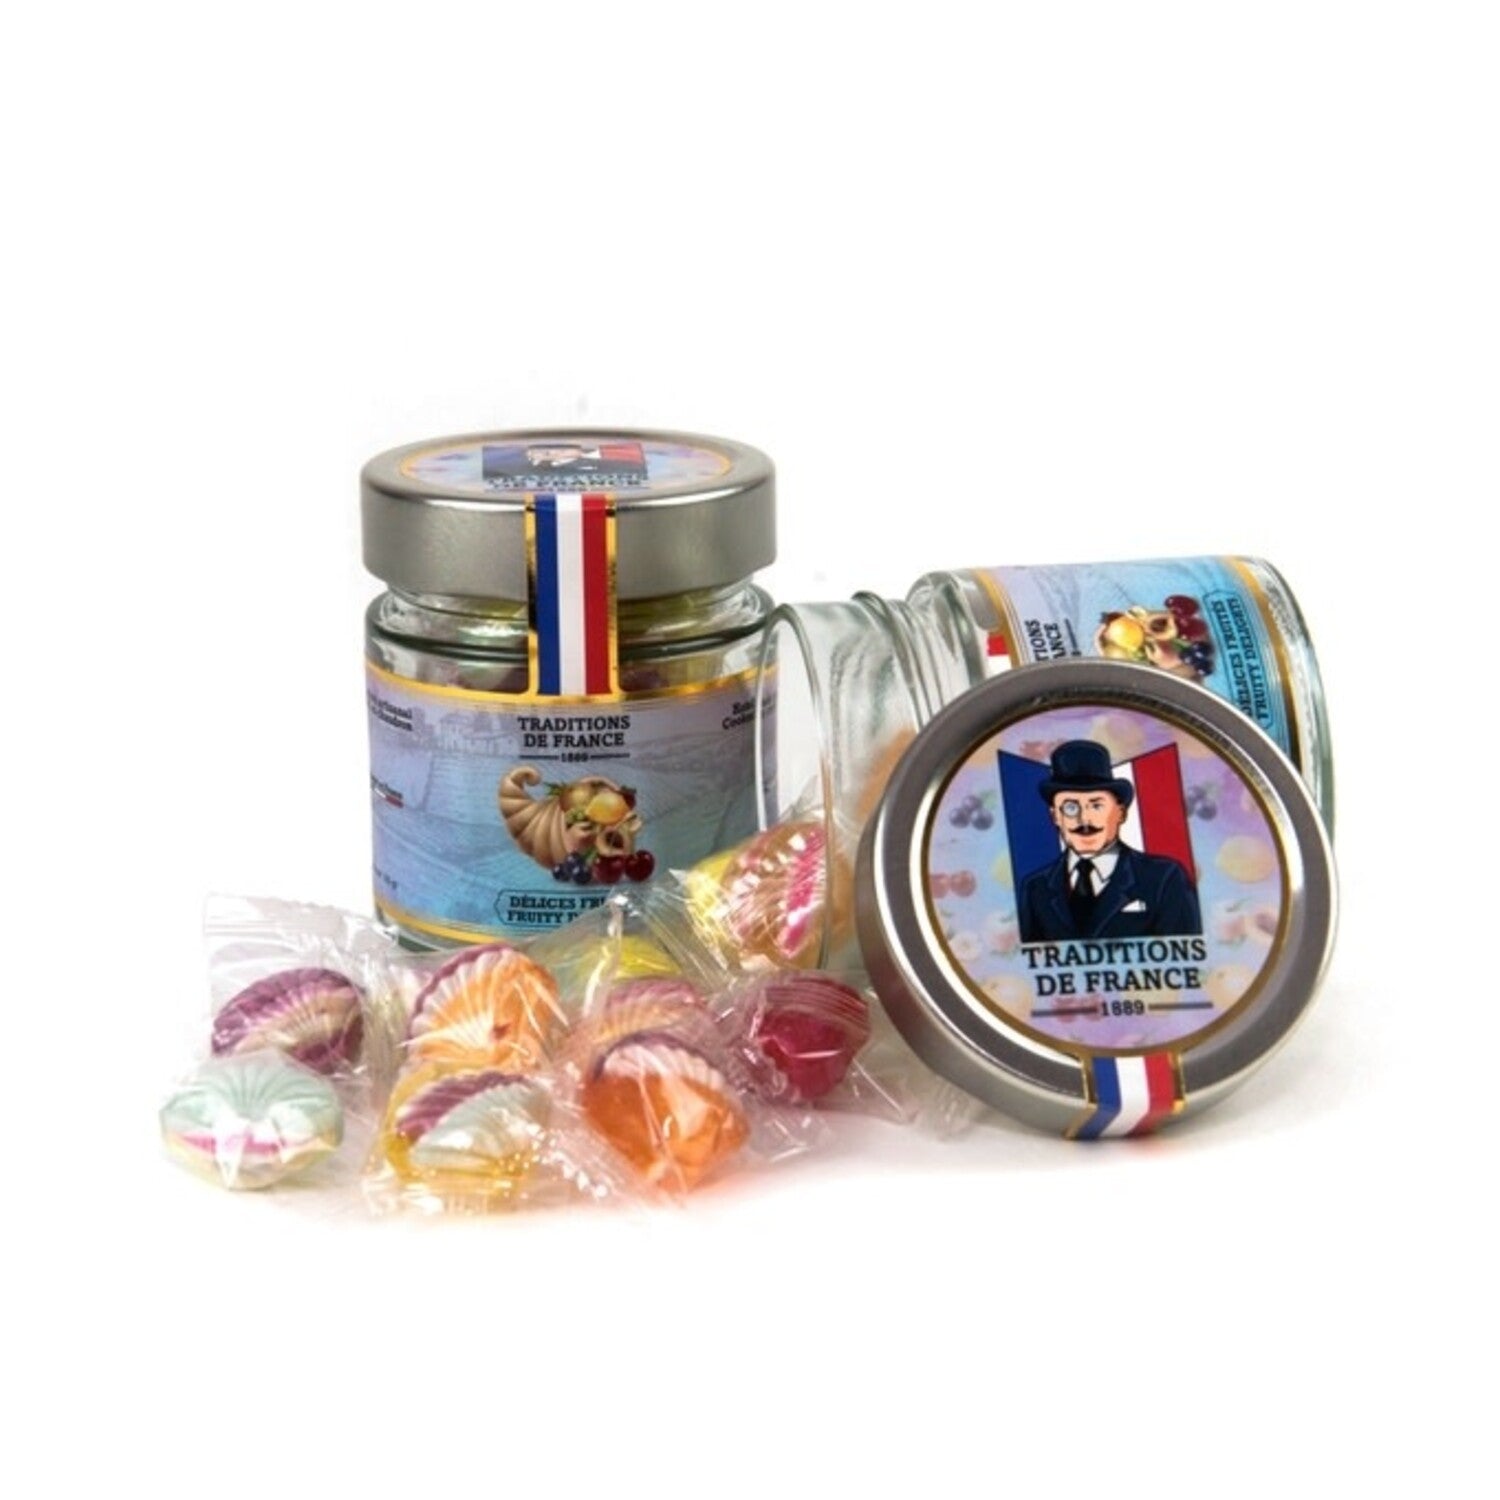 Traditions de France Handmade Hard Candy – Fruity Delights